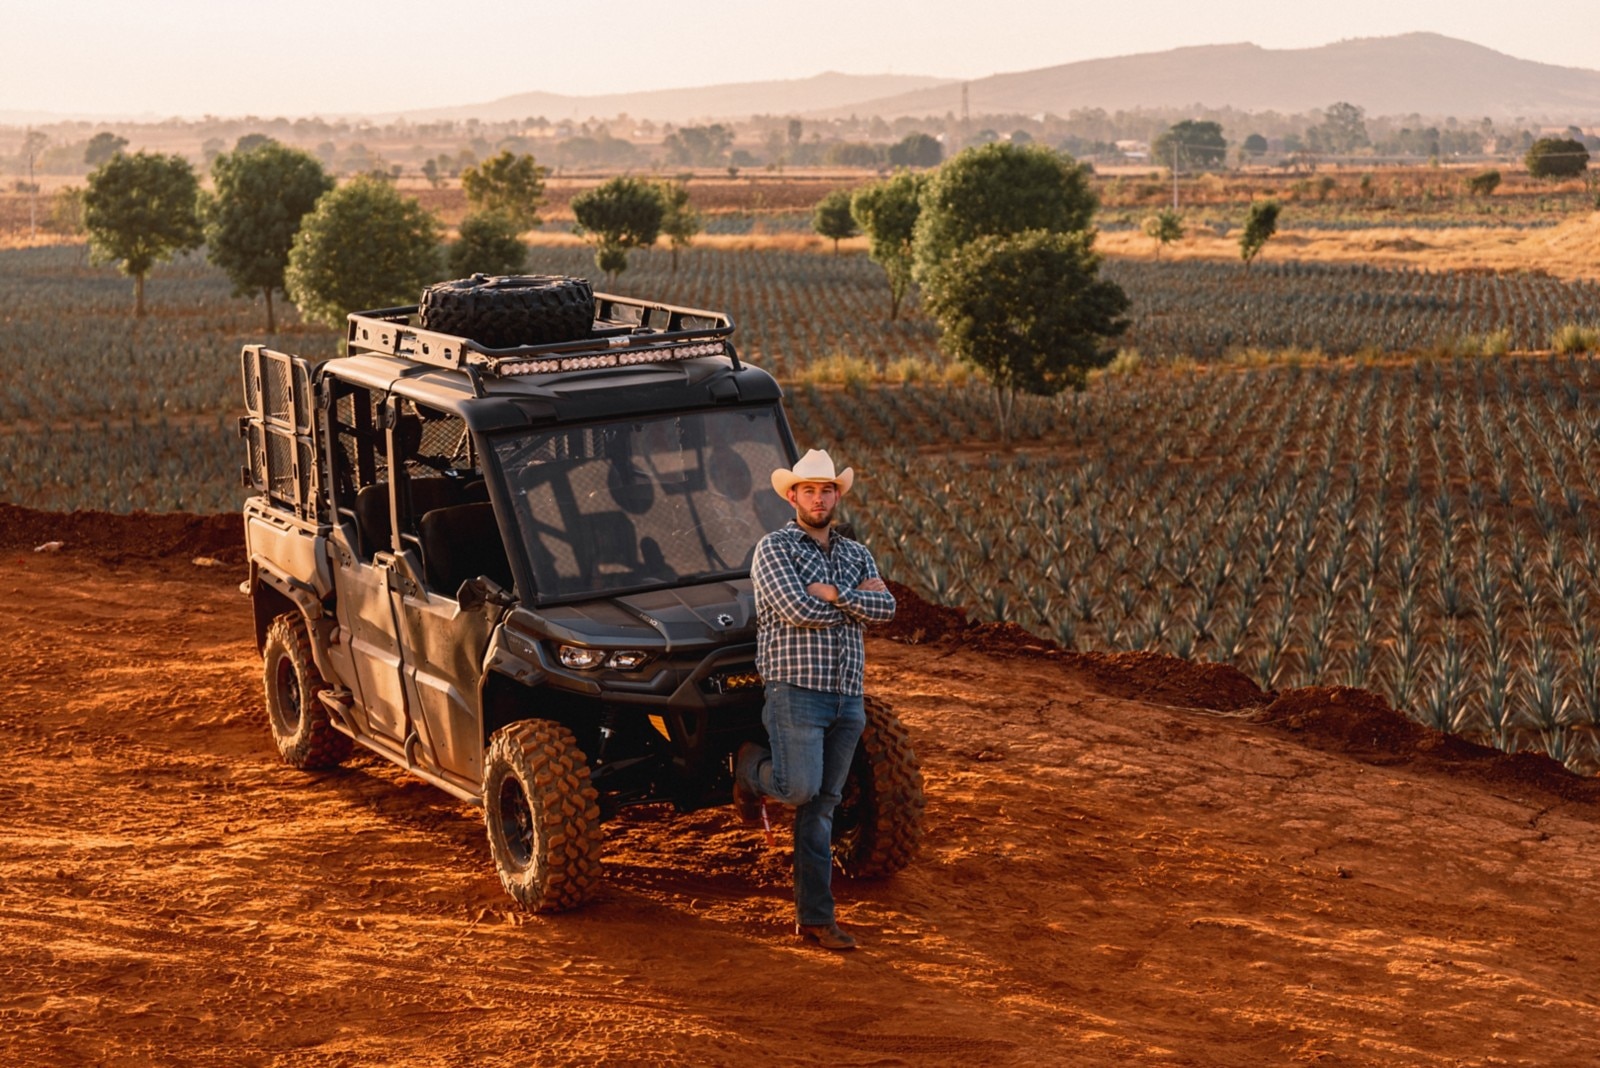 One of the Trujillos standing in front of their Defender with an agave field in the background. 